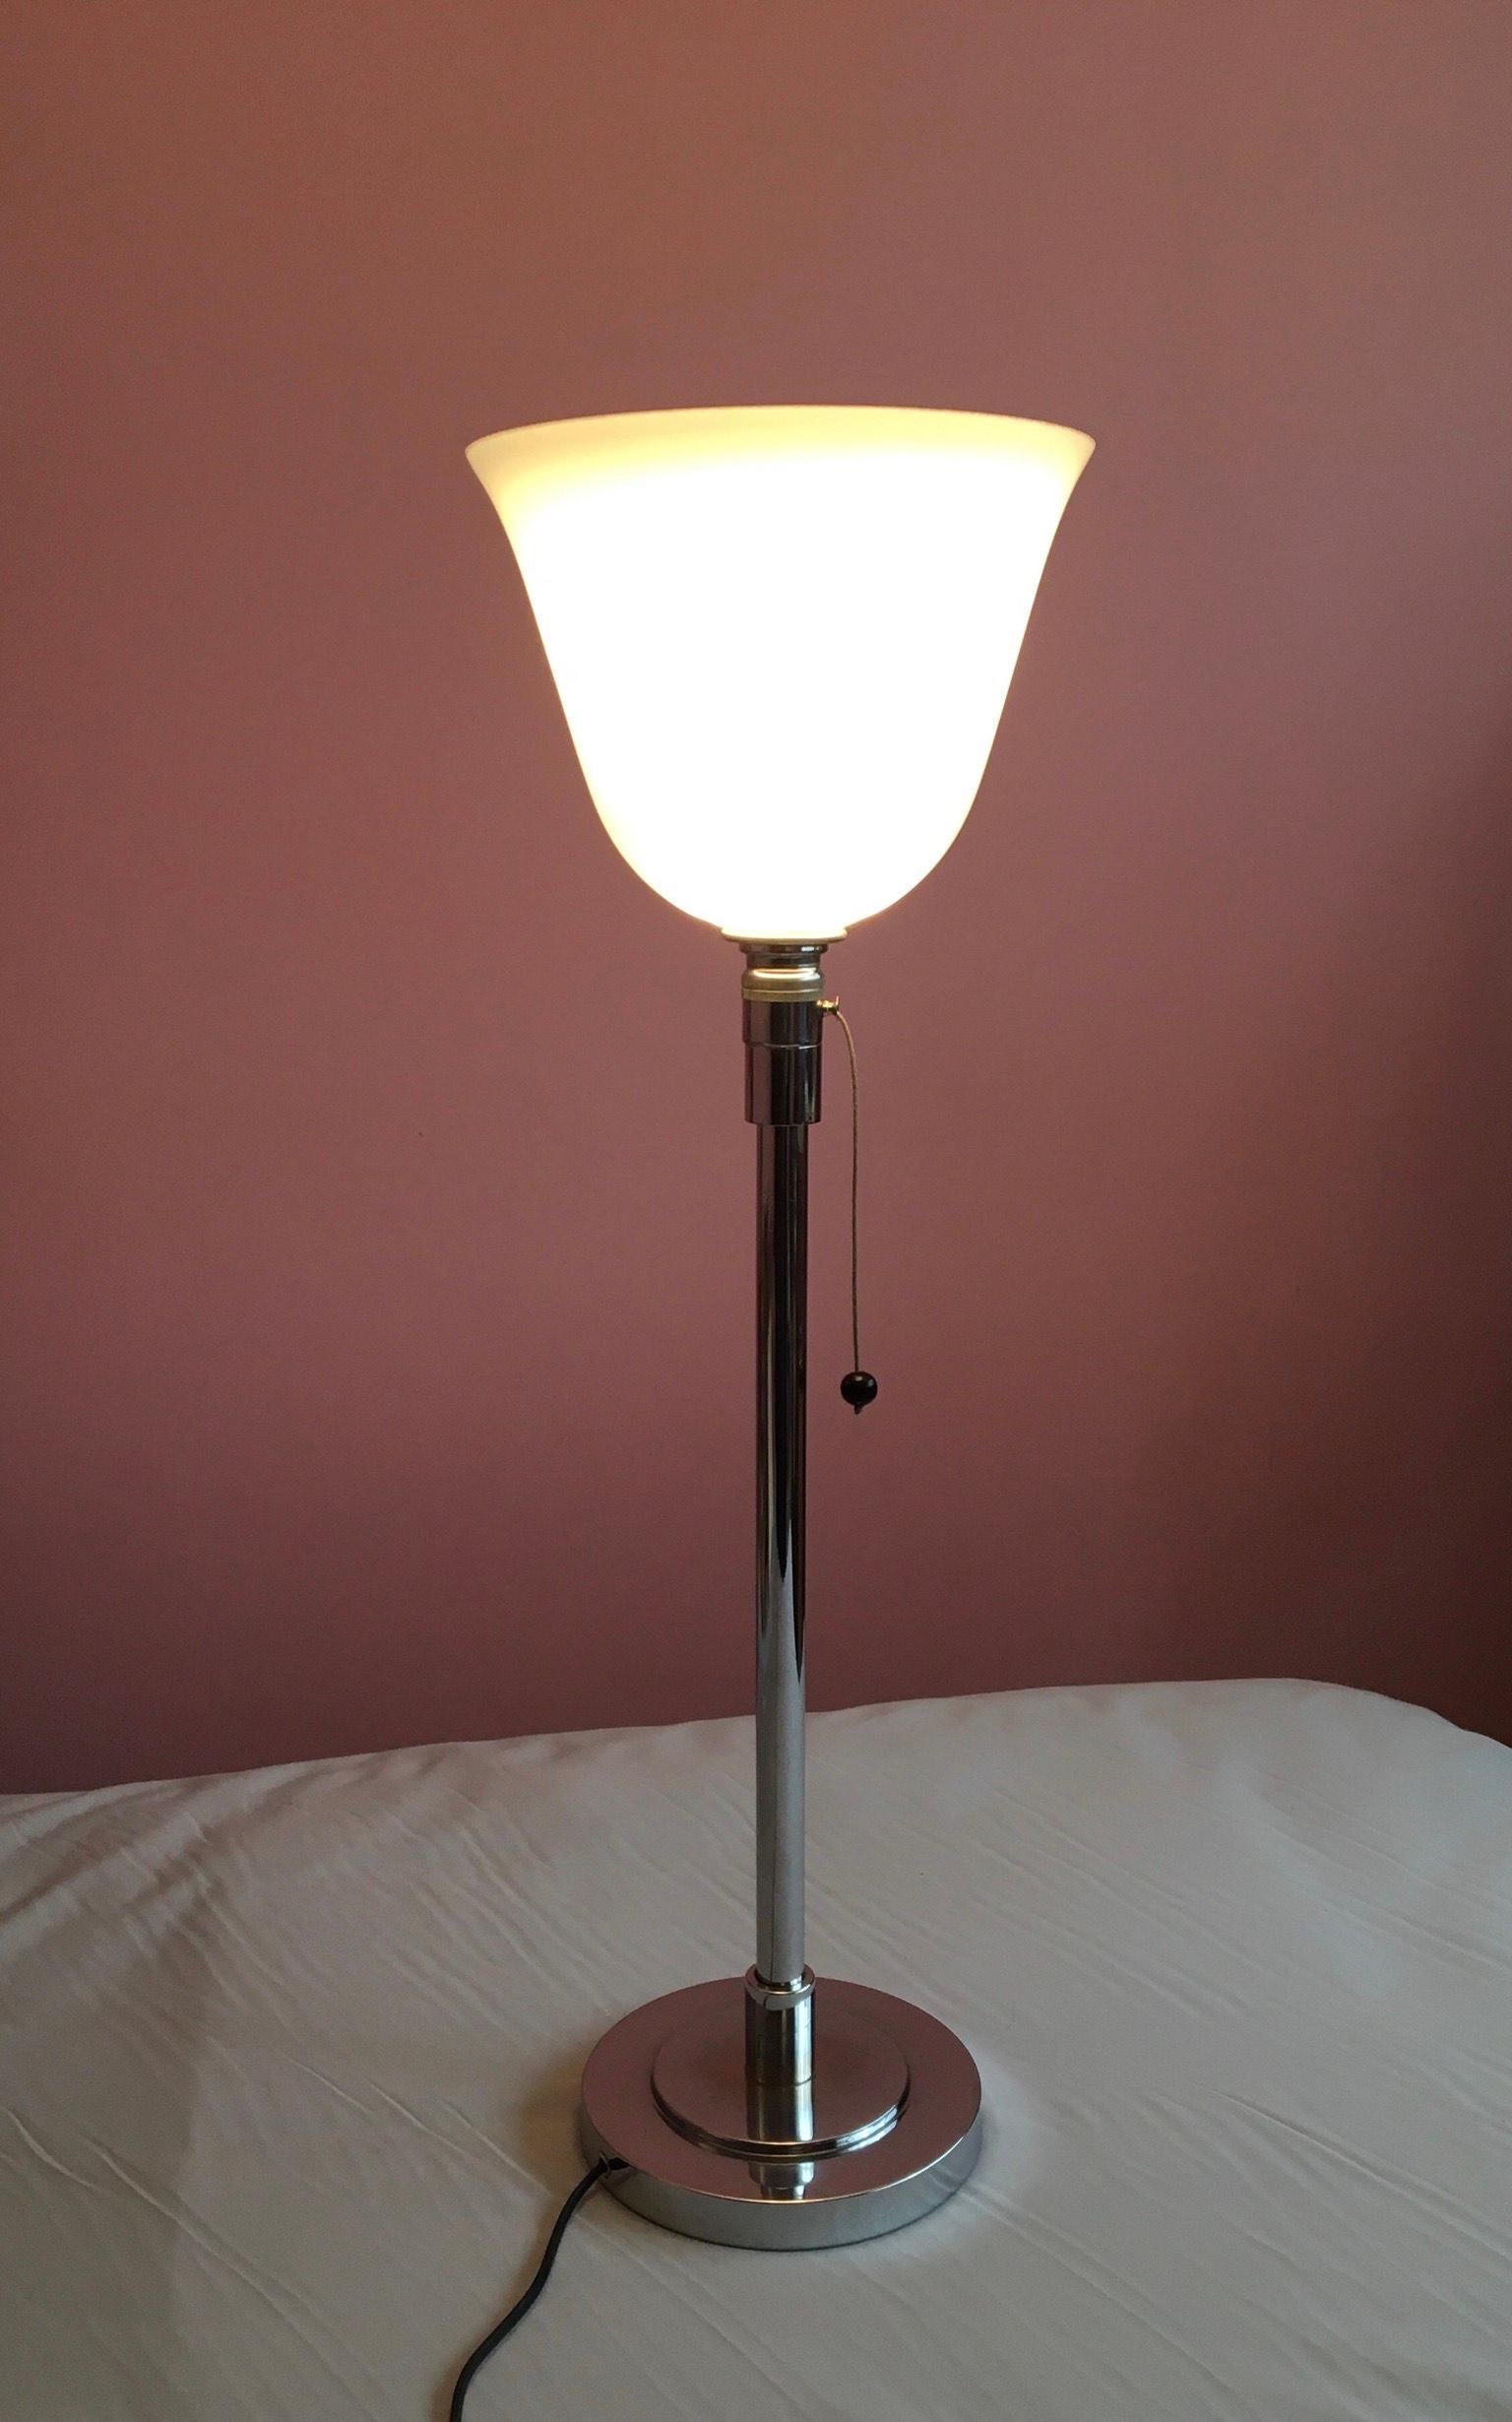 Large French Modernist lamp in the Bauhaus style of the 1930s art deco in chrome-plated brass with large opaline reflector by La Cie des Lampes, later Mazda.
The lamp is in good original condition, the pull switch system is on the socket.(bulb